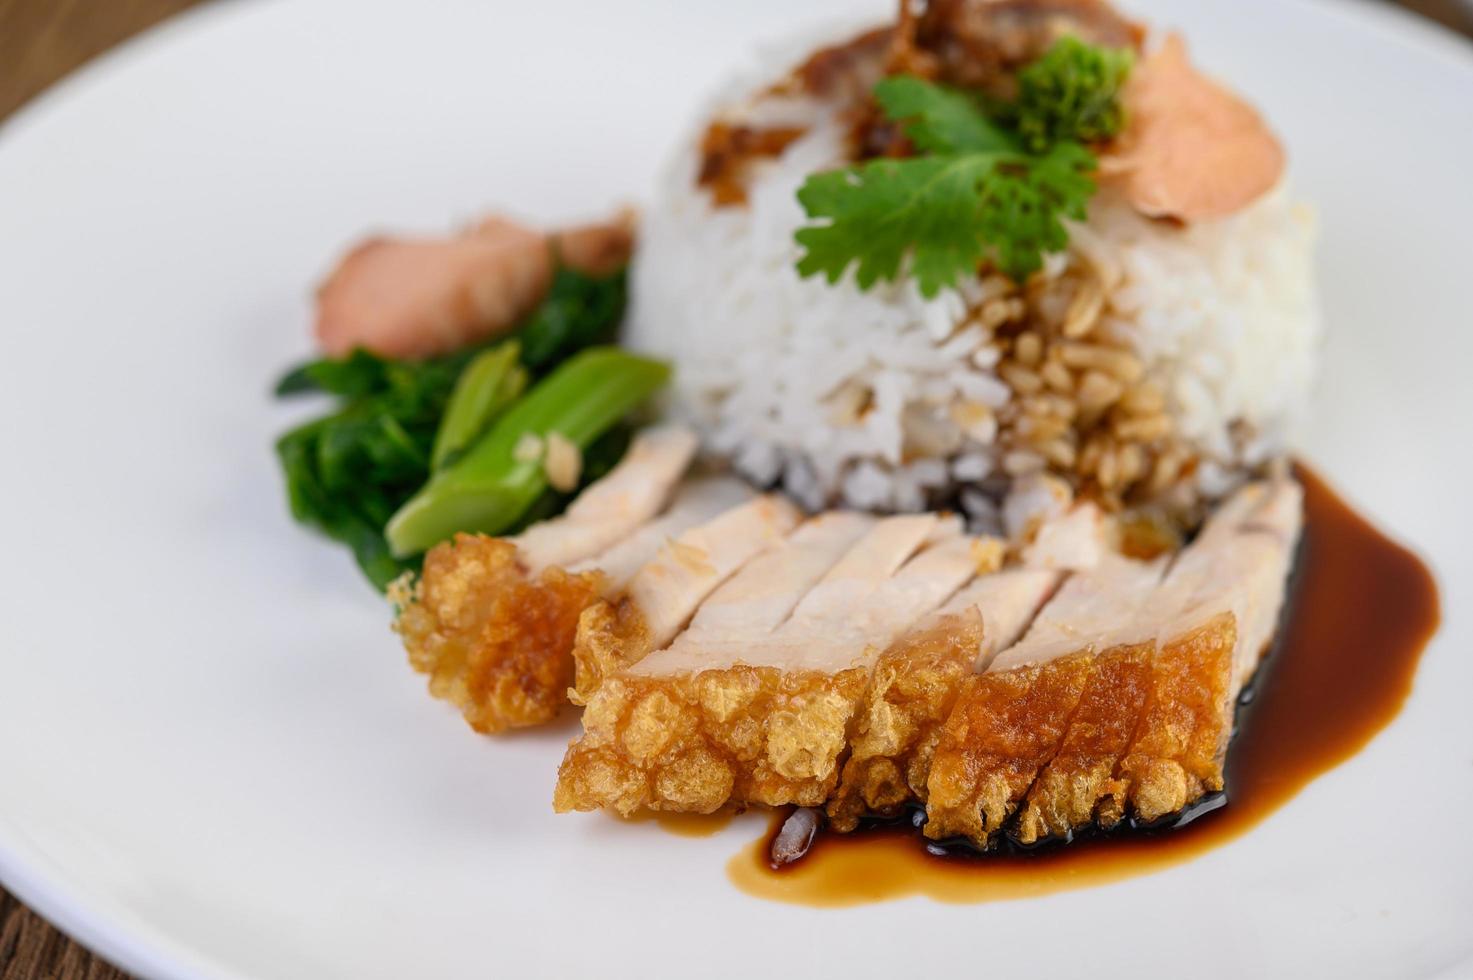 Crispy pork on a white rice topped with sauce photo